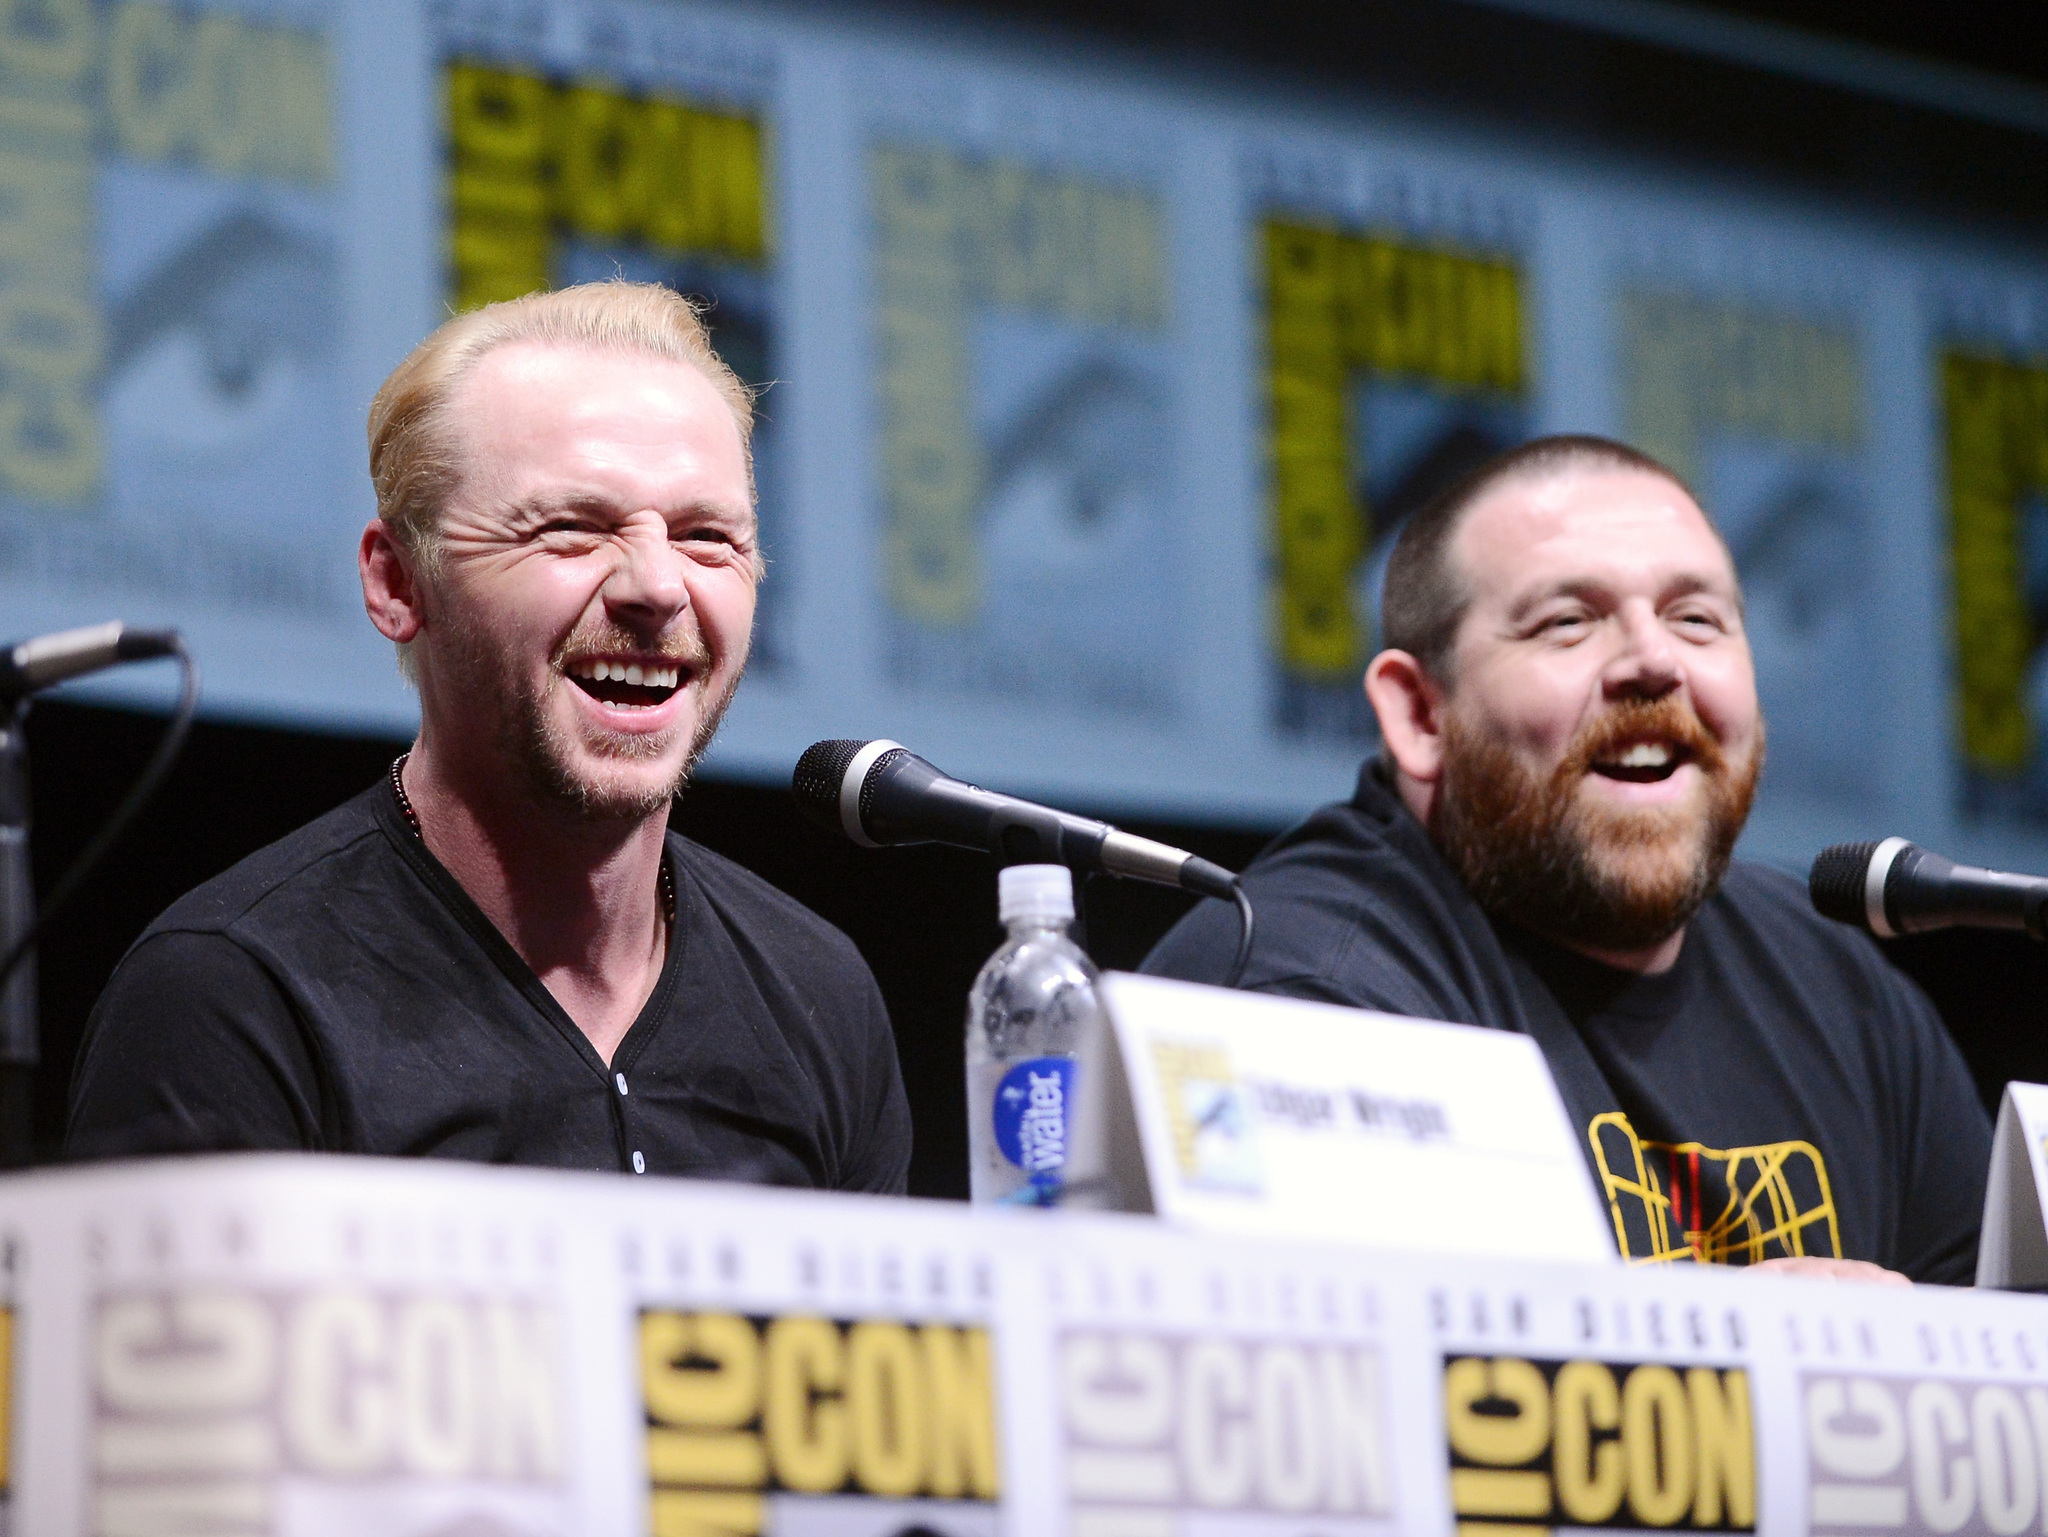 Nick Frost and Simon Pegg at event of The World's End (2013)